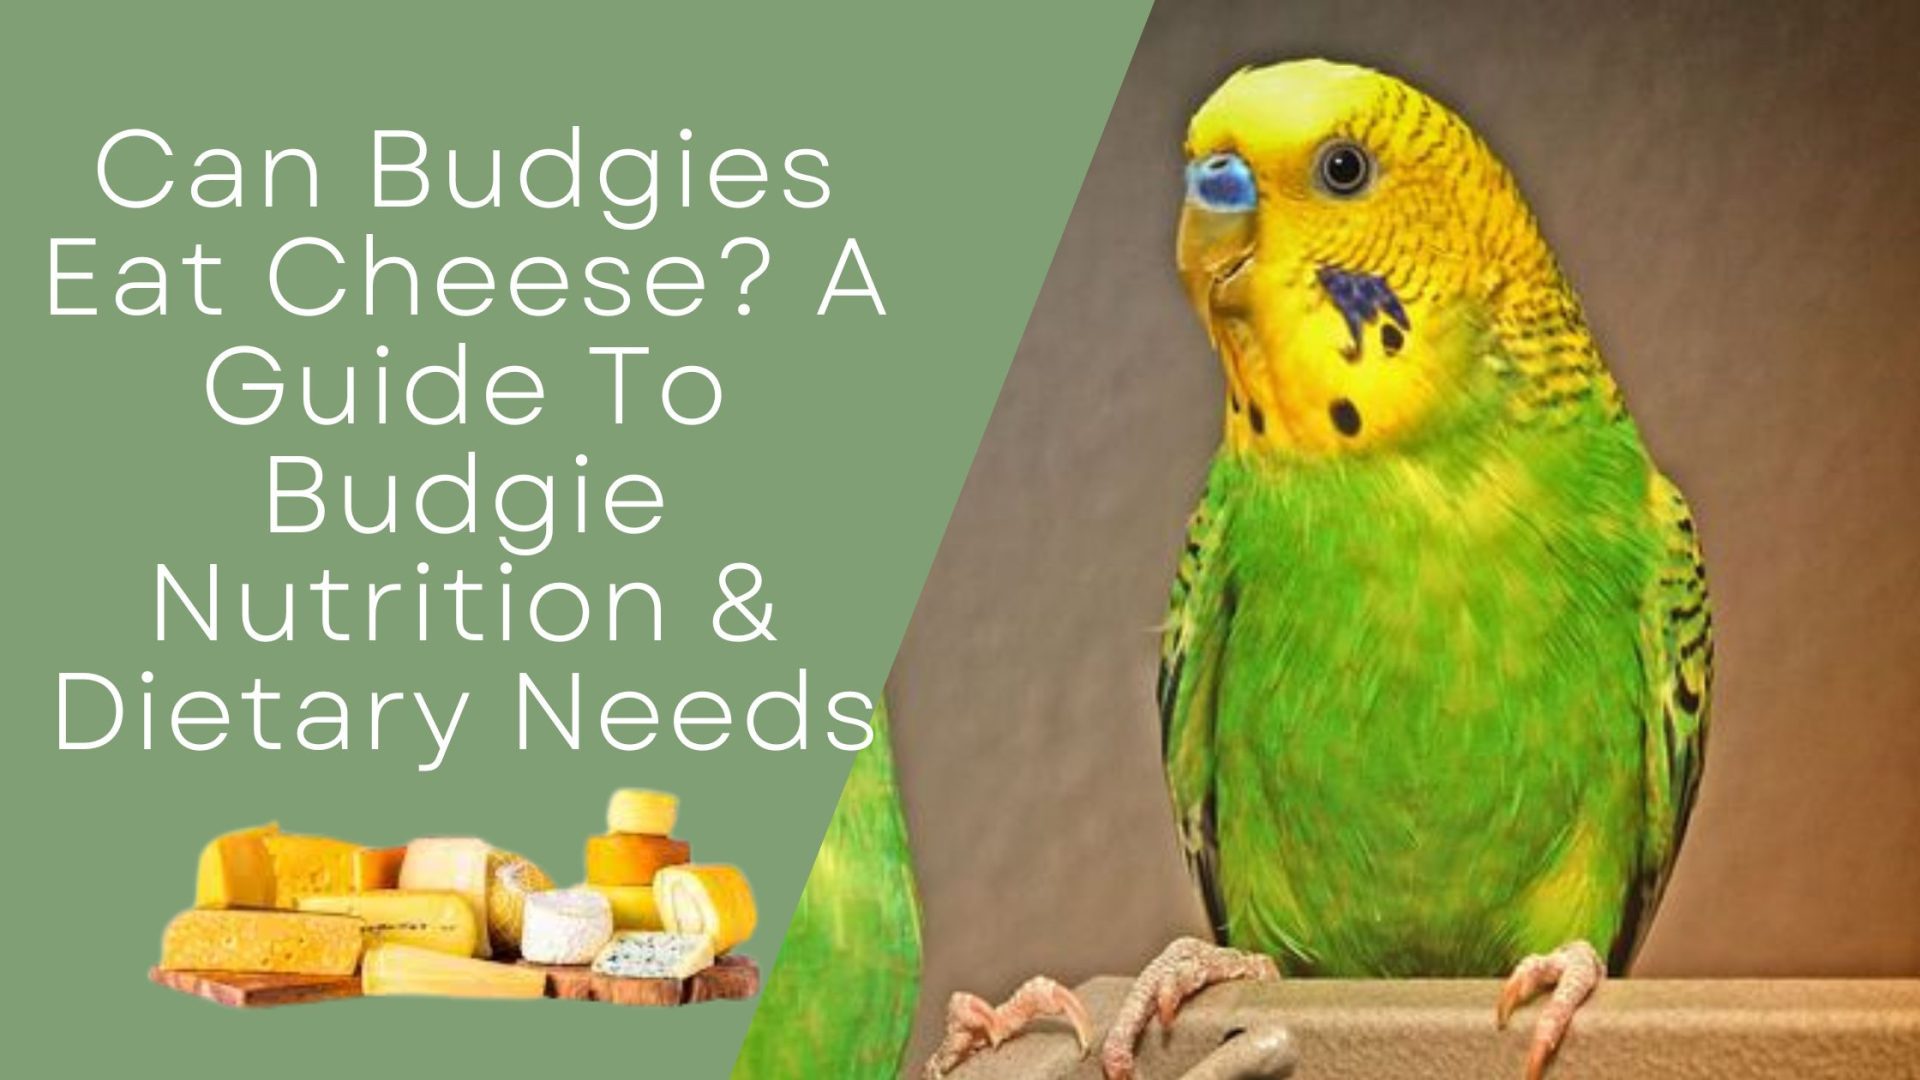 Can Budgies Eat Cheese